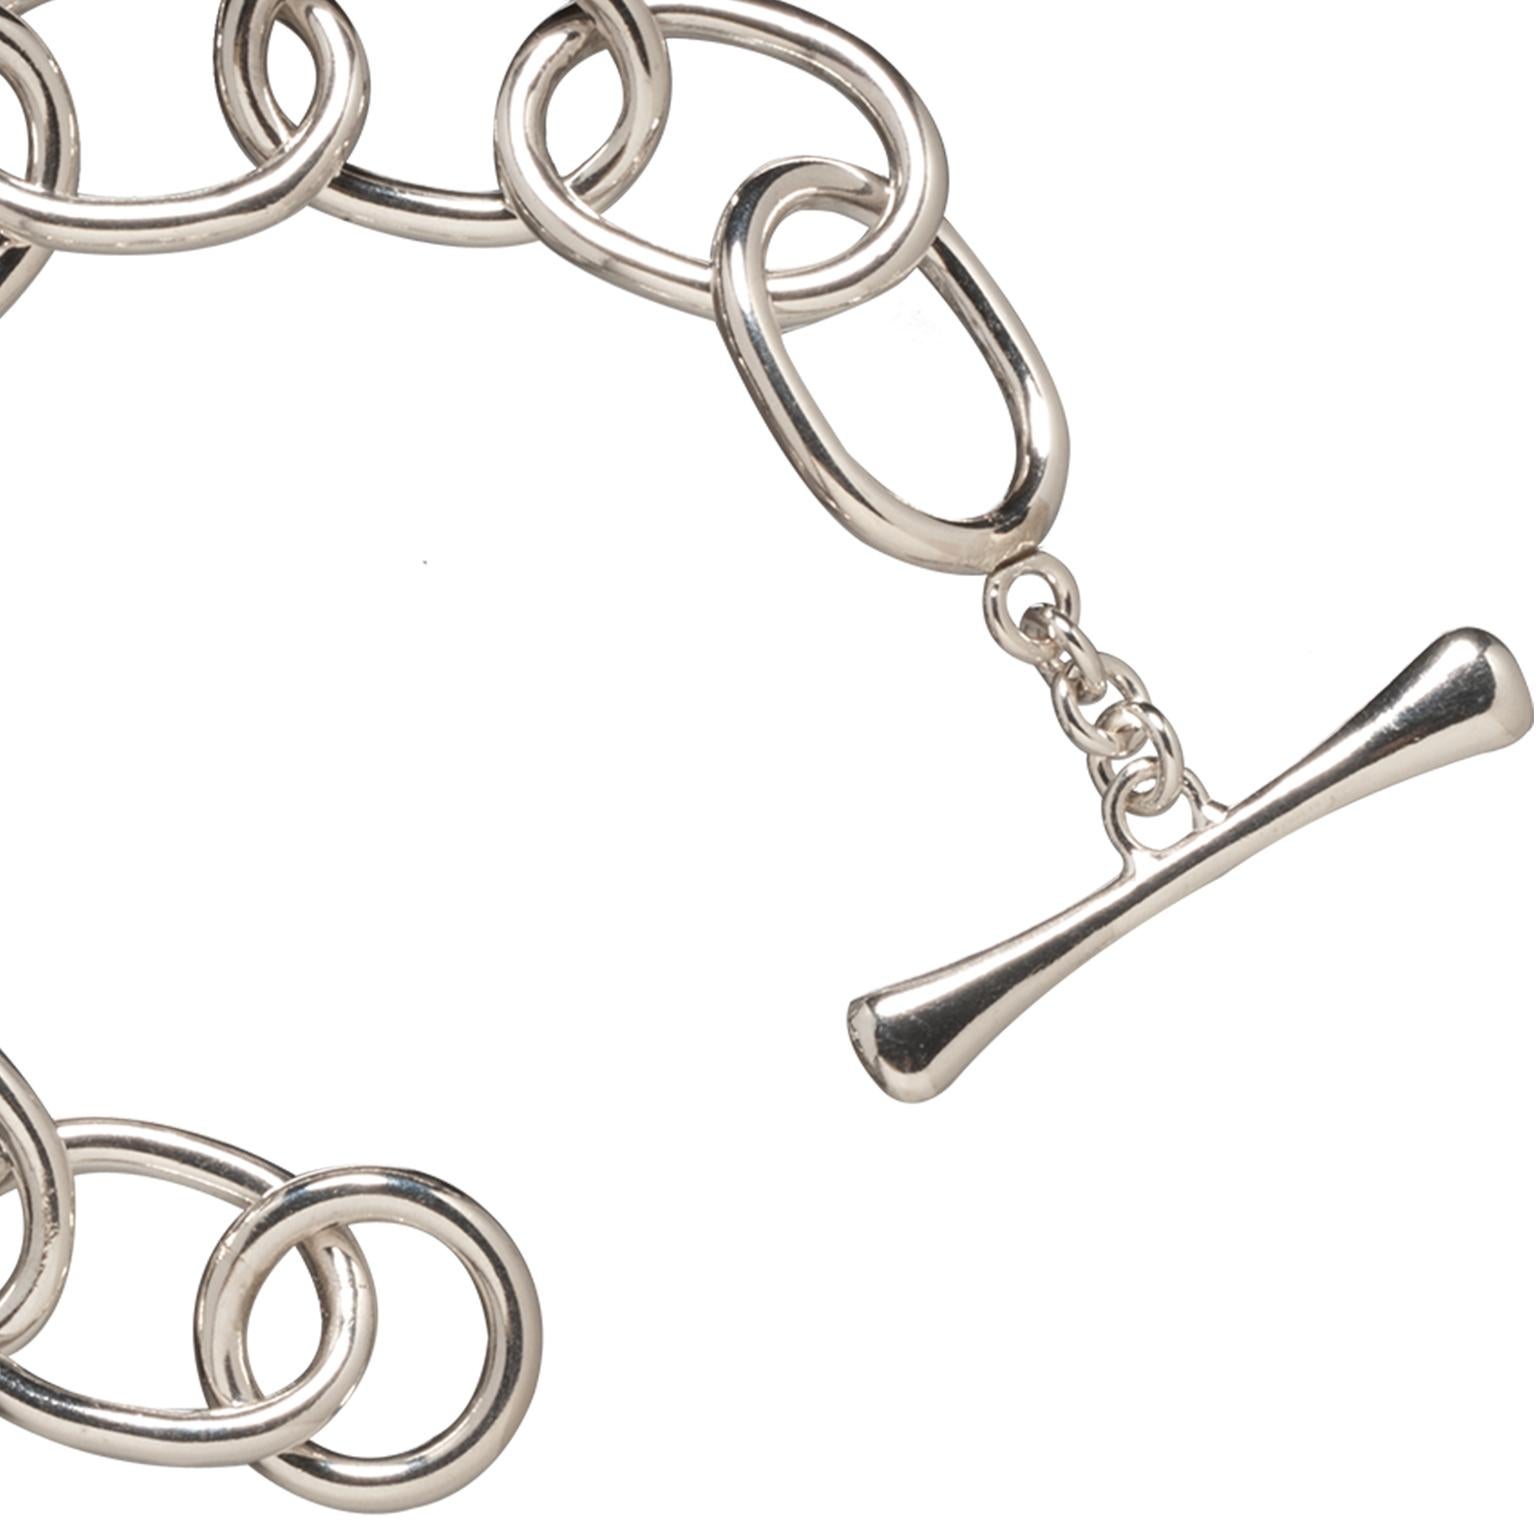 A twist on the classic chain link bracelet, Faye Kim's oval link bracelet is a statement piece with impact!  Extra large oval links are handmade with thick sterling silver wire to give the bracelet substance.  The over-sized toggle is the perfect